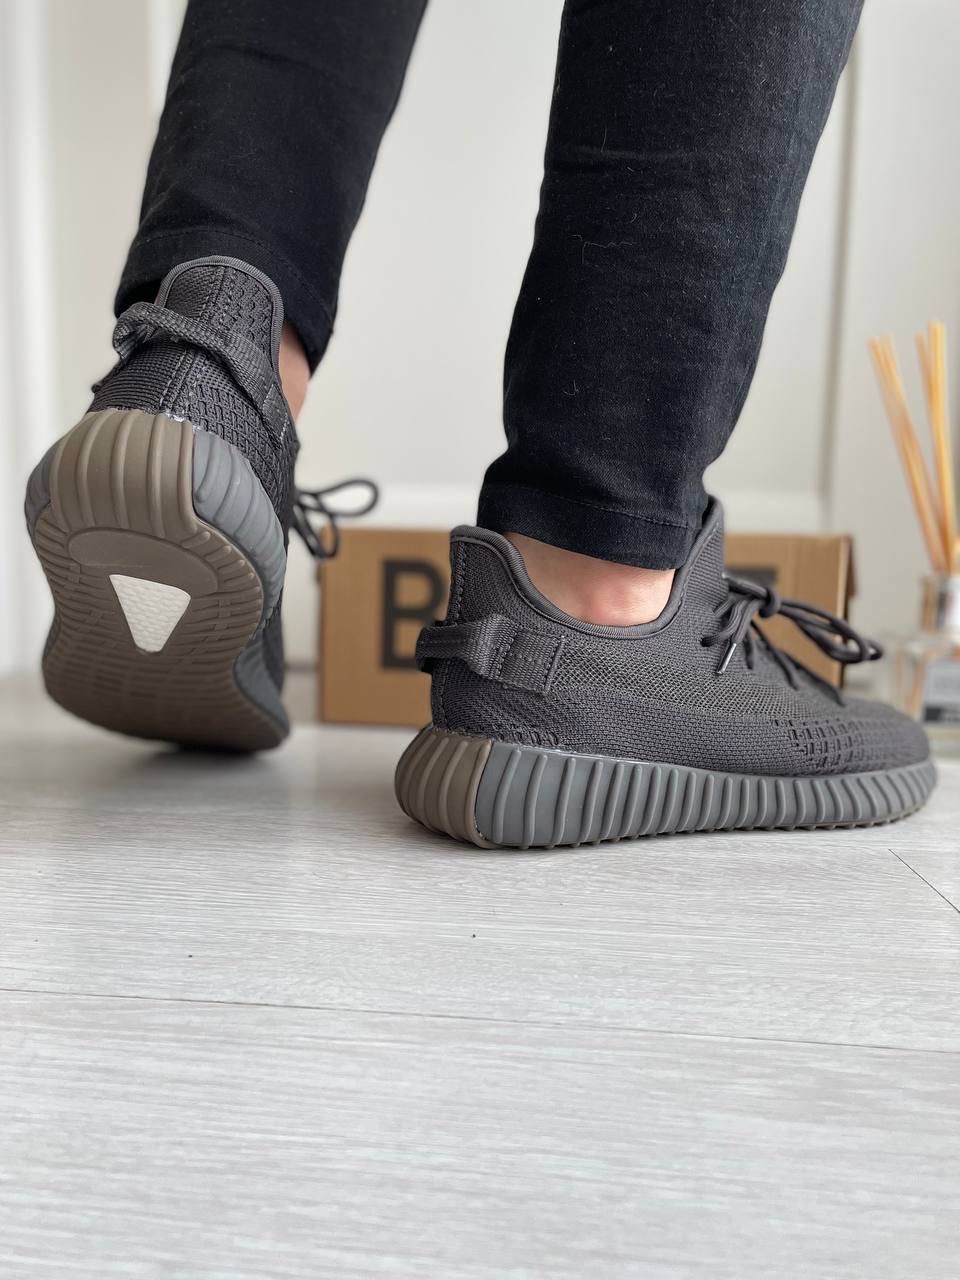 Кроссовки Adidas Yeezy Boost 350 V2 made in India